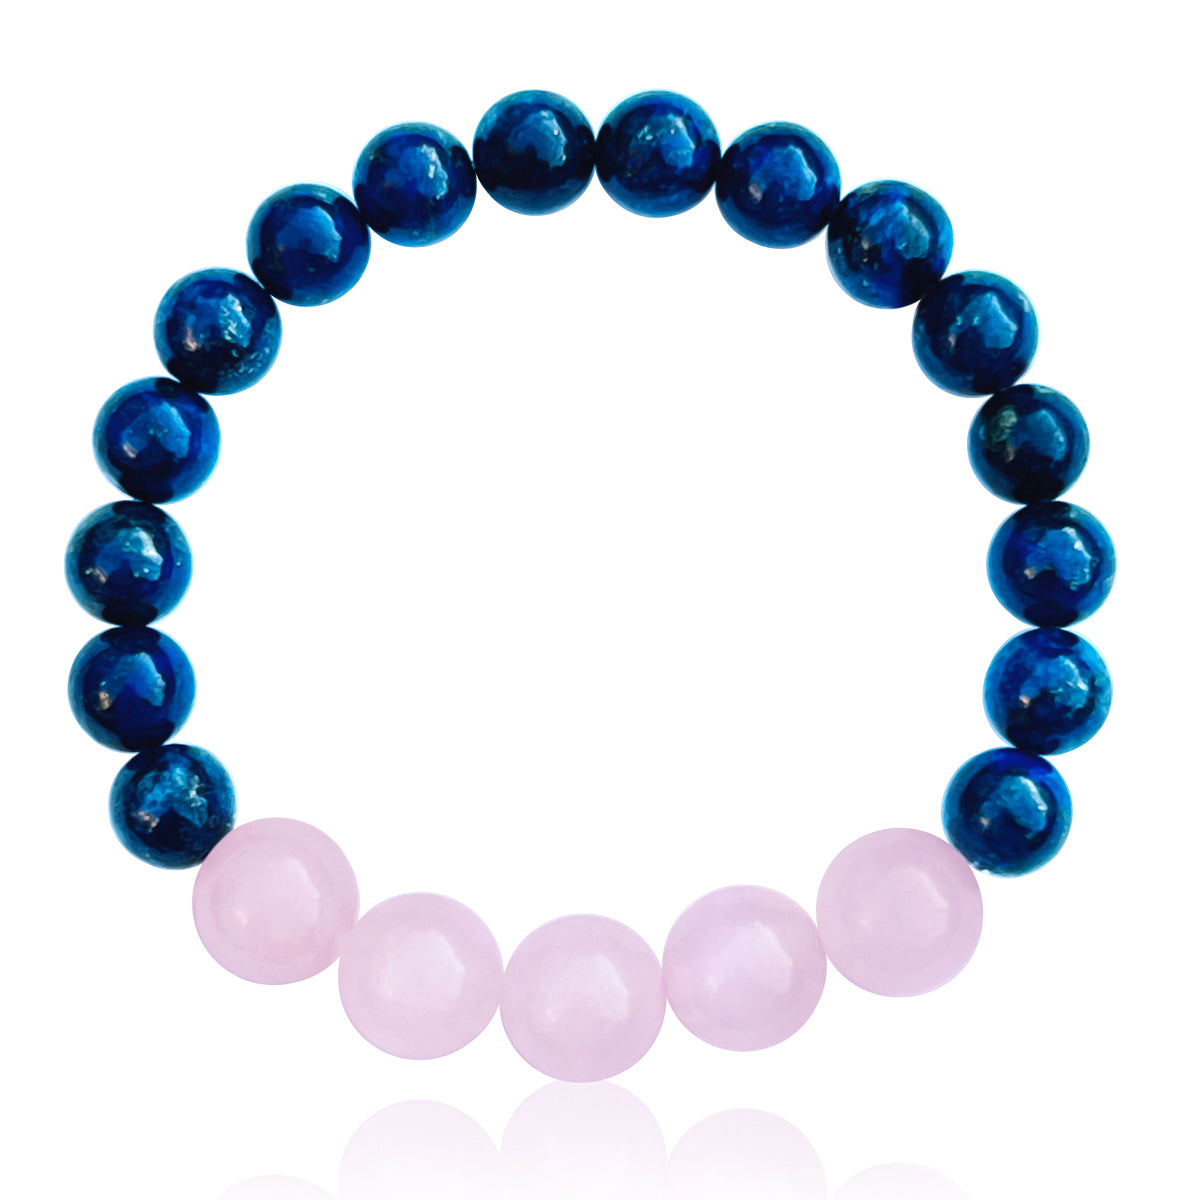 Know Your Self Worth Bracelet with Lapis Lazuli and Rose Quartz. “The way you treat yourself sets the standard for others.” – Sonya Friedman. Lapis Lazuli jewelry is a symbol of truth. Rose quartz calms your nerves and helps with self-love and self-acceptance.